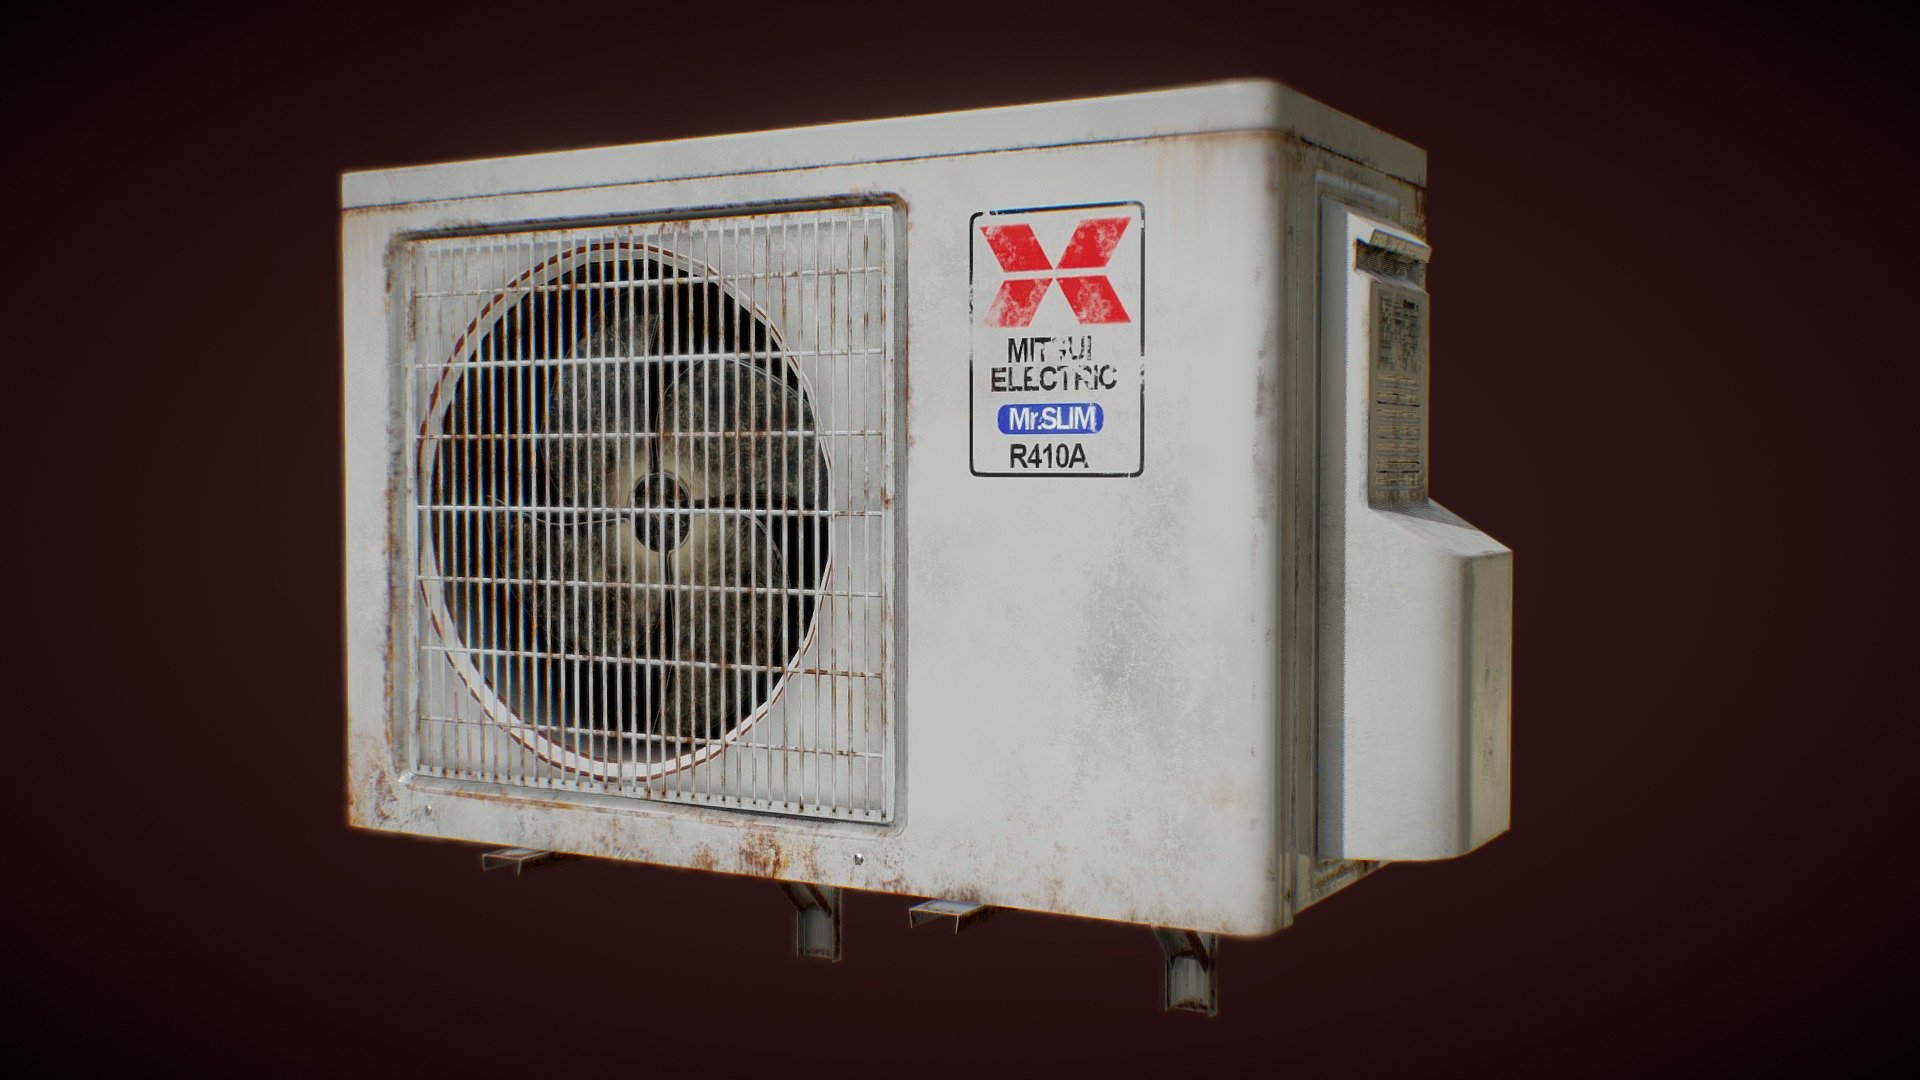 This is a model of a split-system air conditioner's rusted outdoor metal cabinet that contains the condenser and compressor. 

This model has been created with PBR work flow 3d model